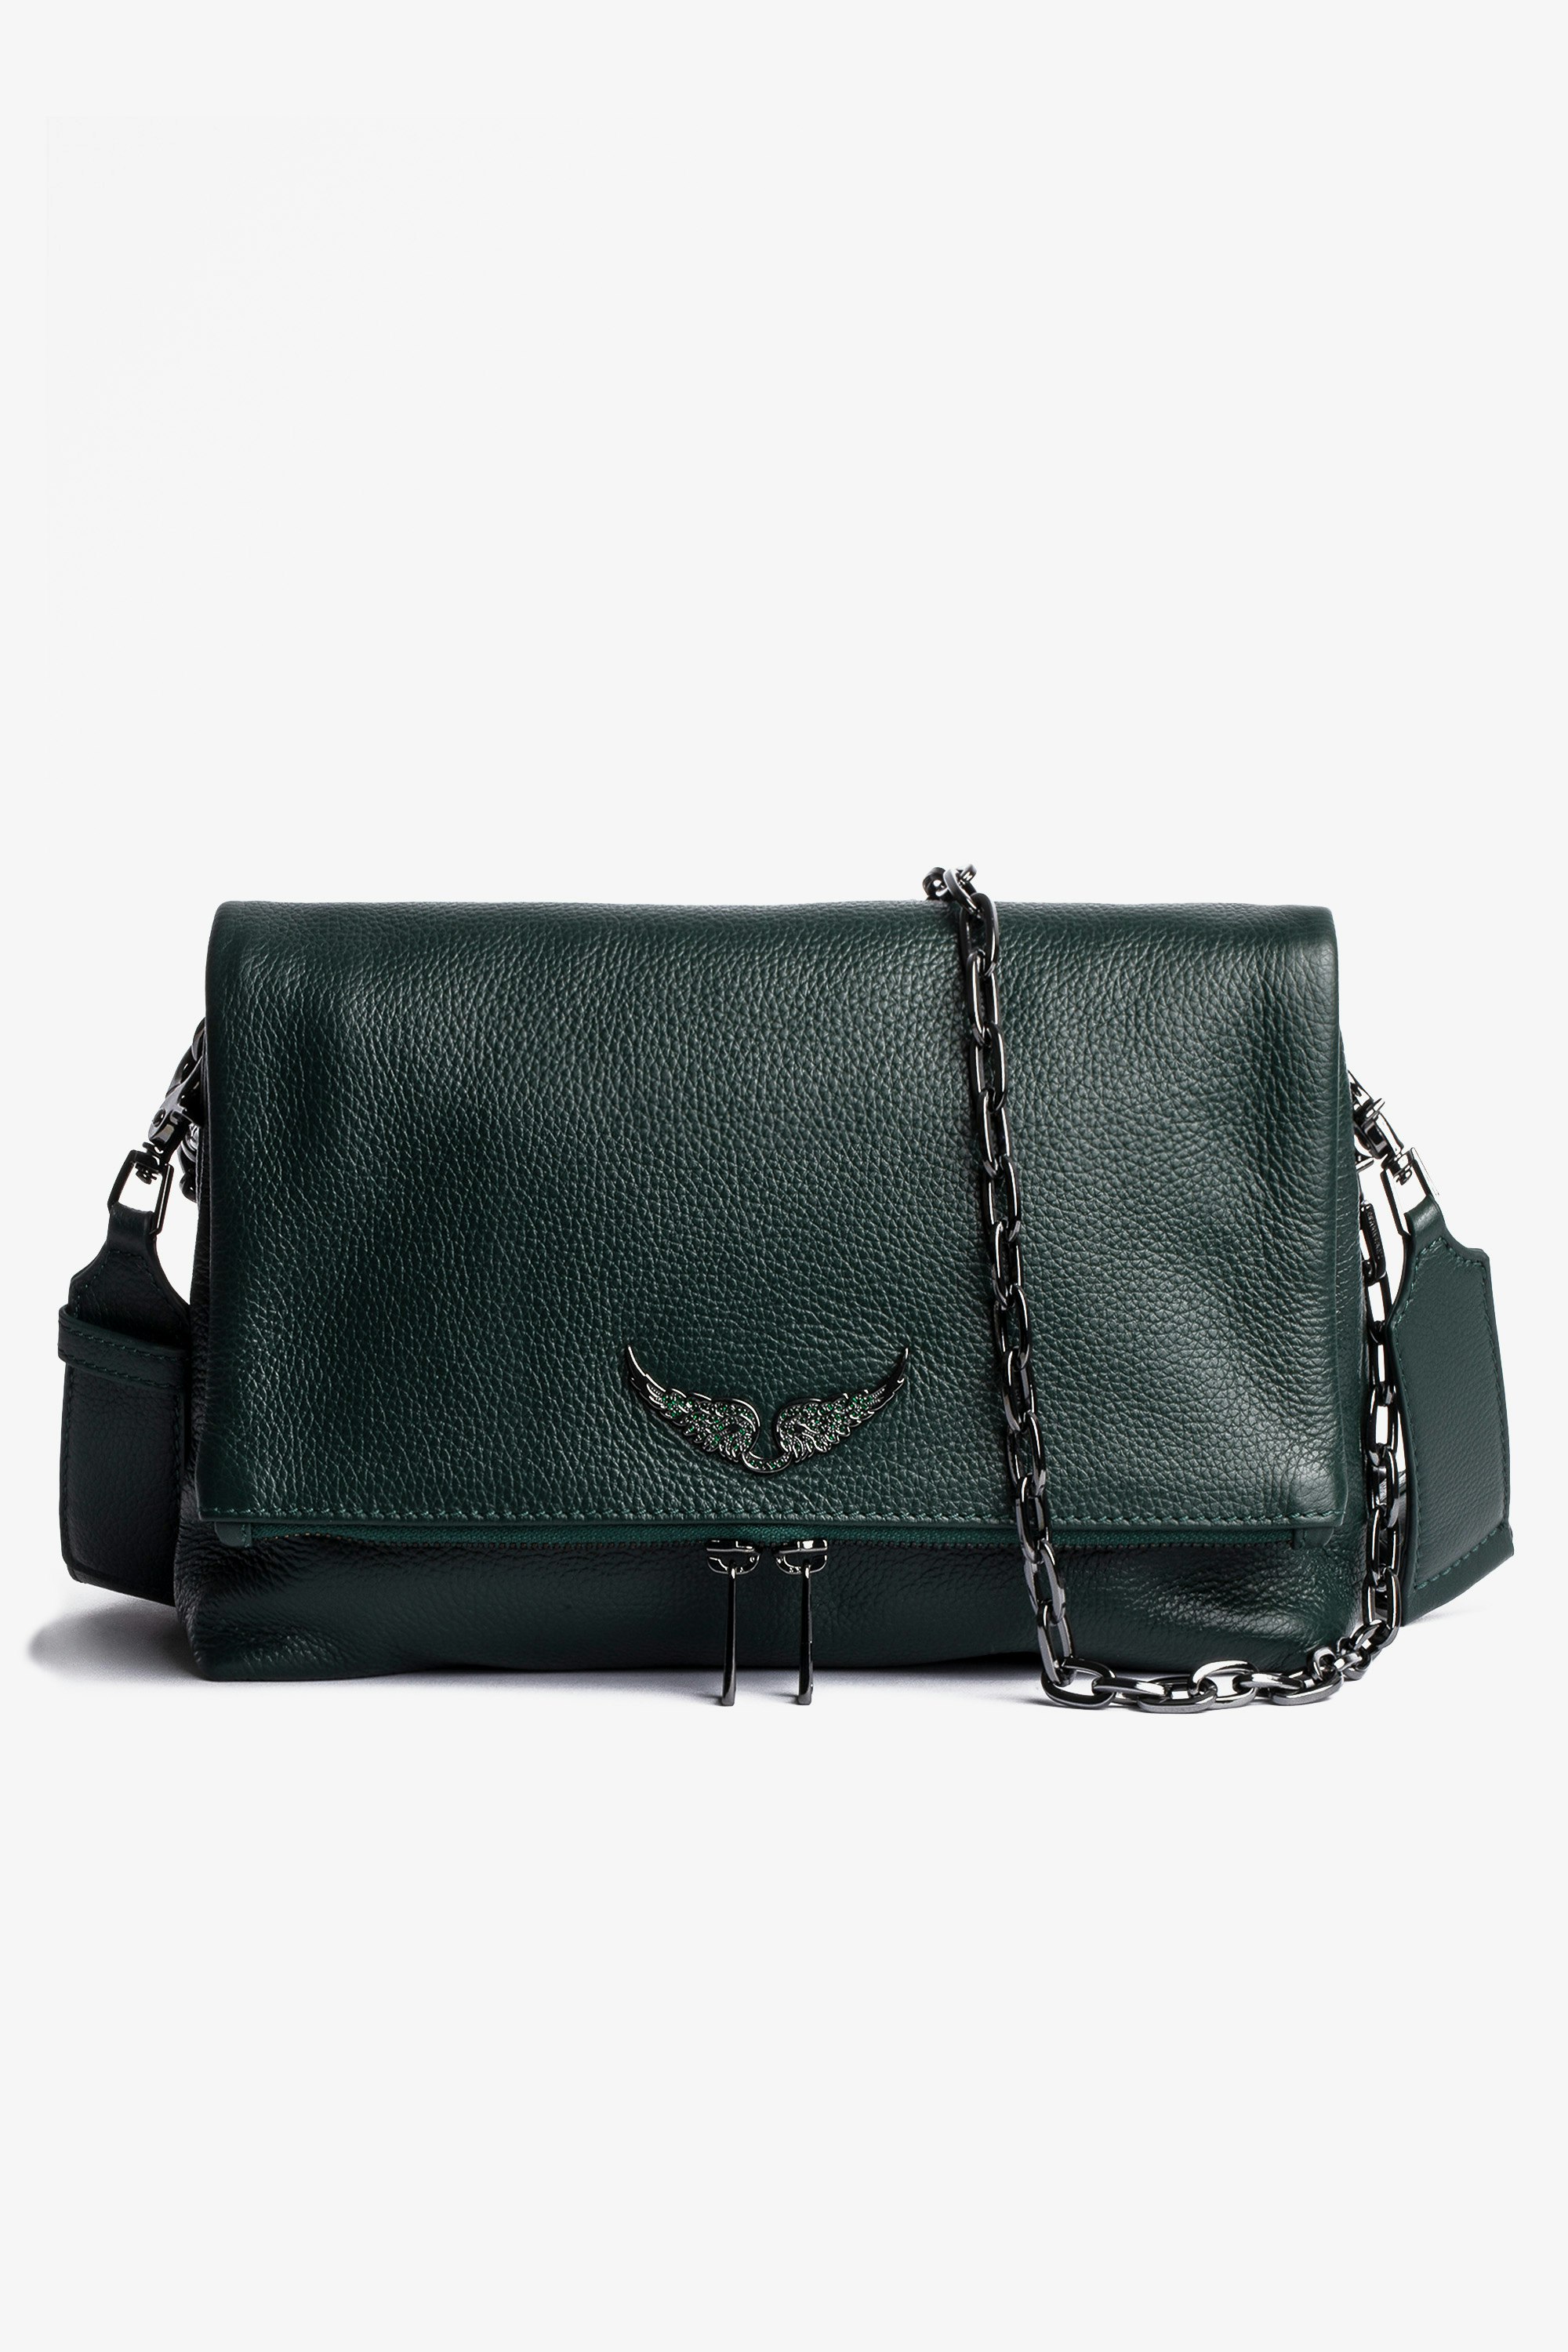 Rocky bag Women's bag with shoulder strap in metallic green leather